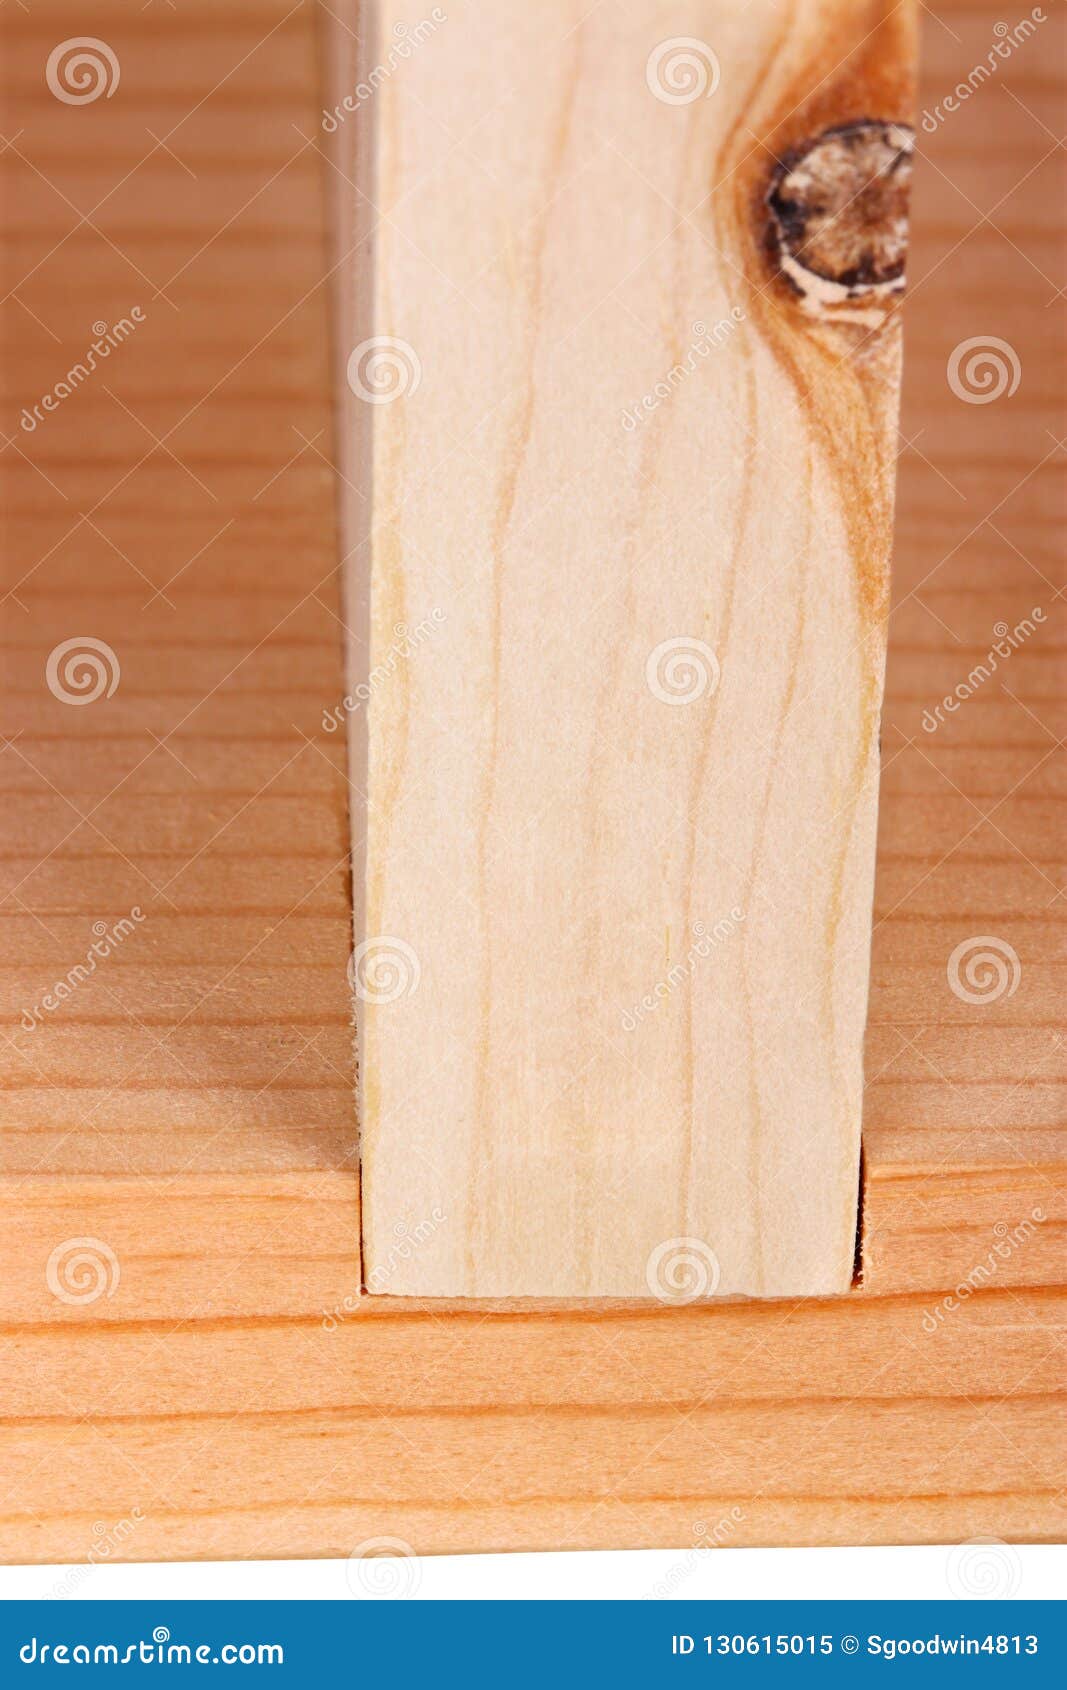 close-up of a woodworking dado joint  vertical